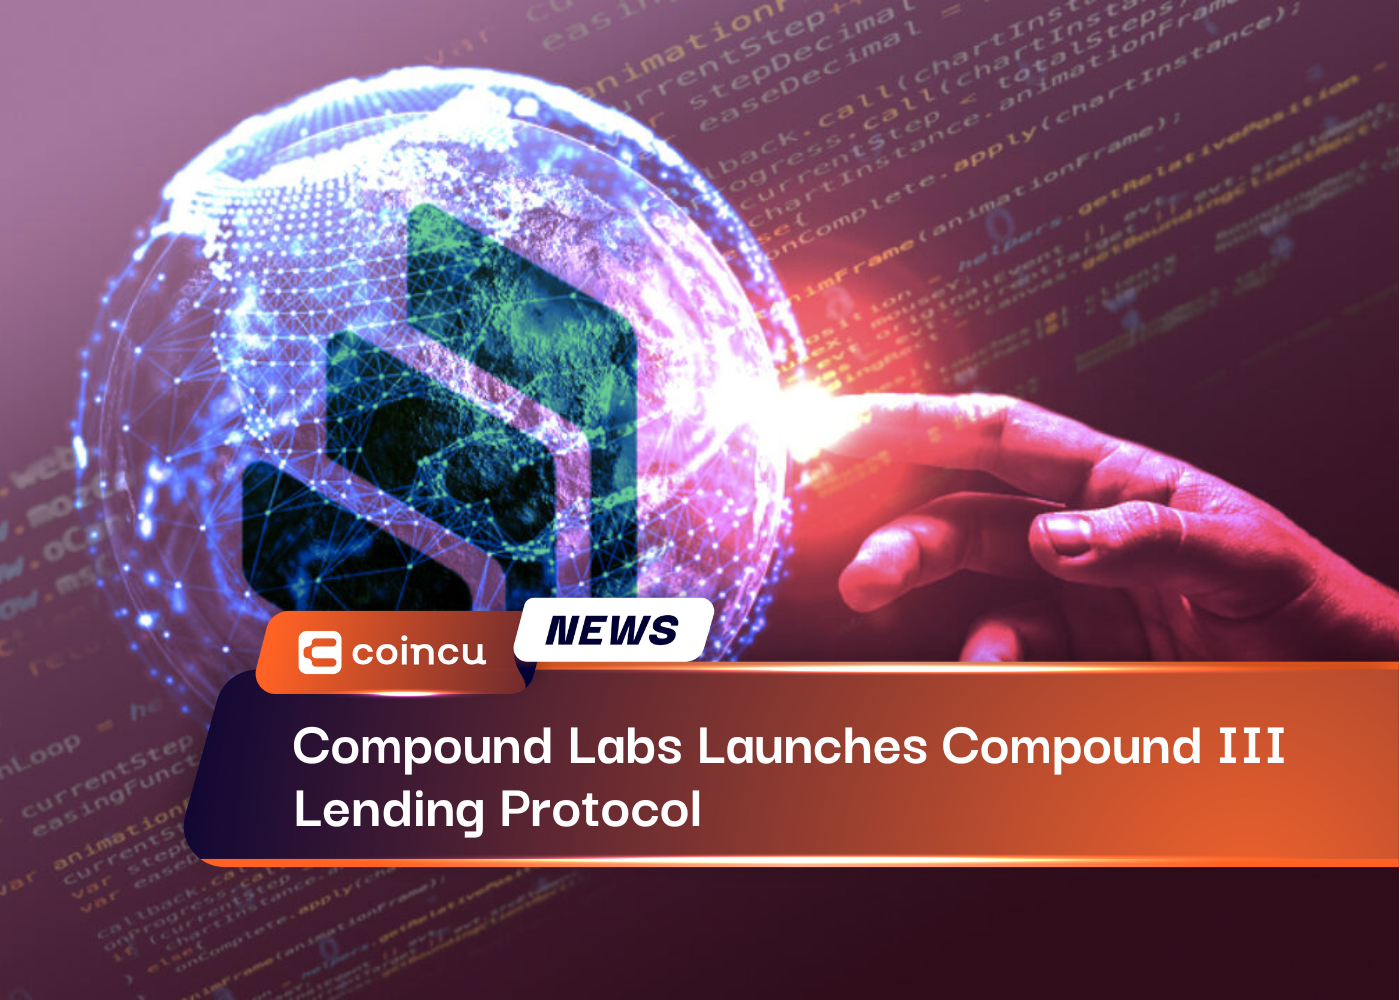 Compound Labs Launches Compound III Lending Protocol